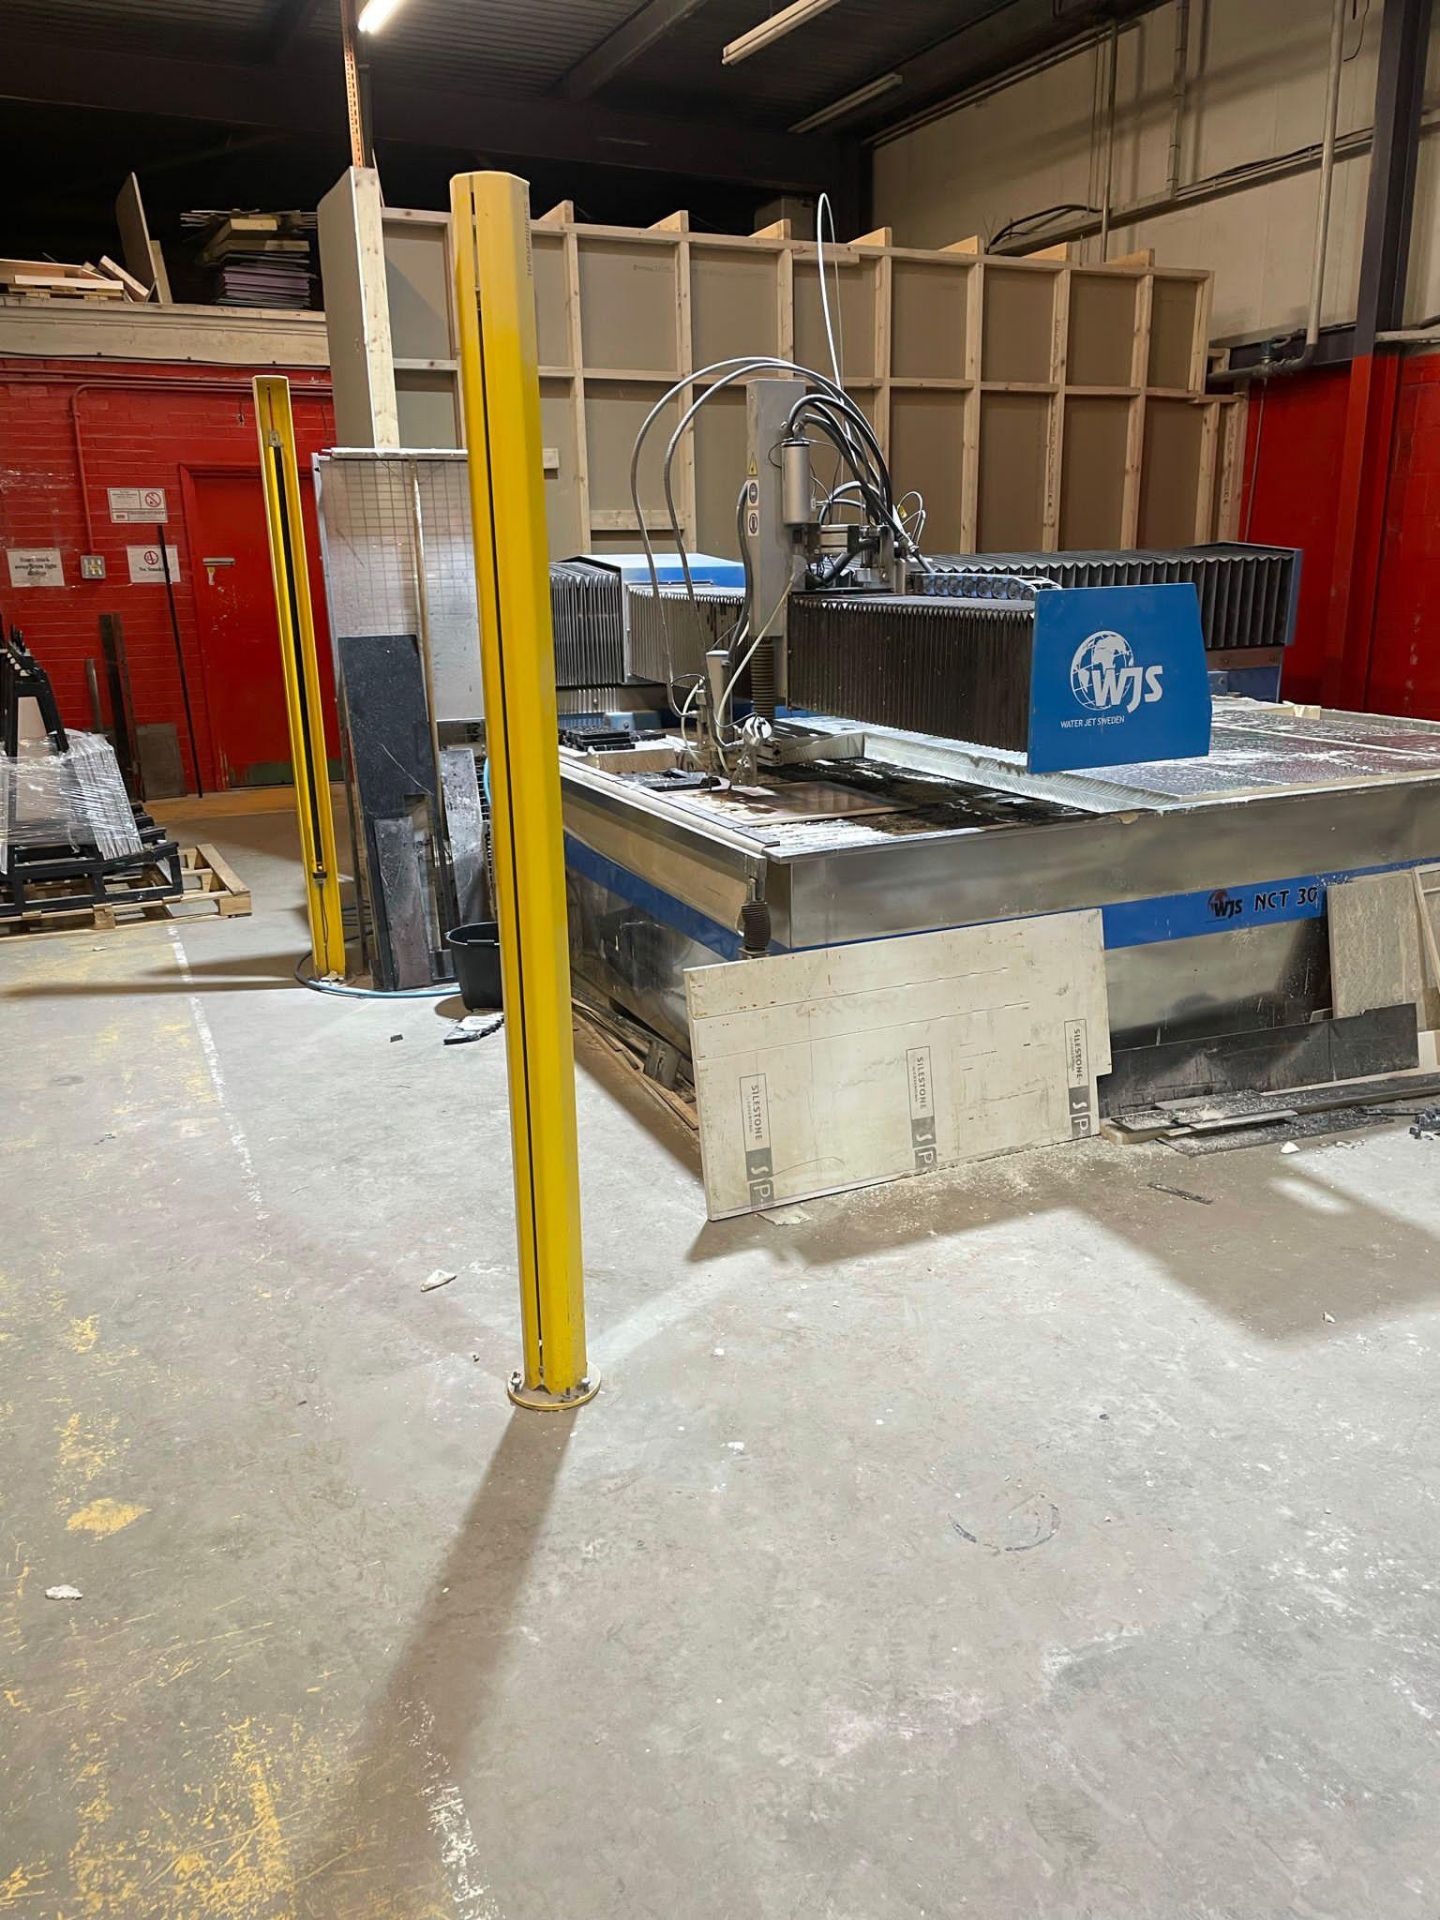 2019 Waterjet Sweden NCT30 waterjet cutting machine, comes with MARK compressor M5M.5D and KMT pump - Image 5 of 11